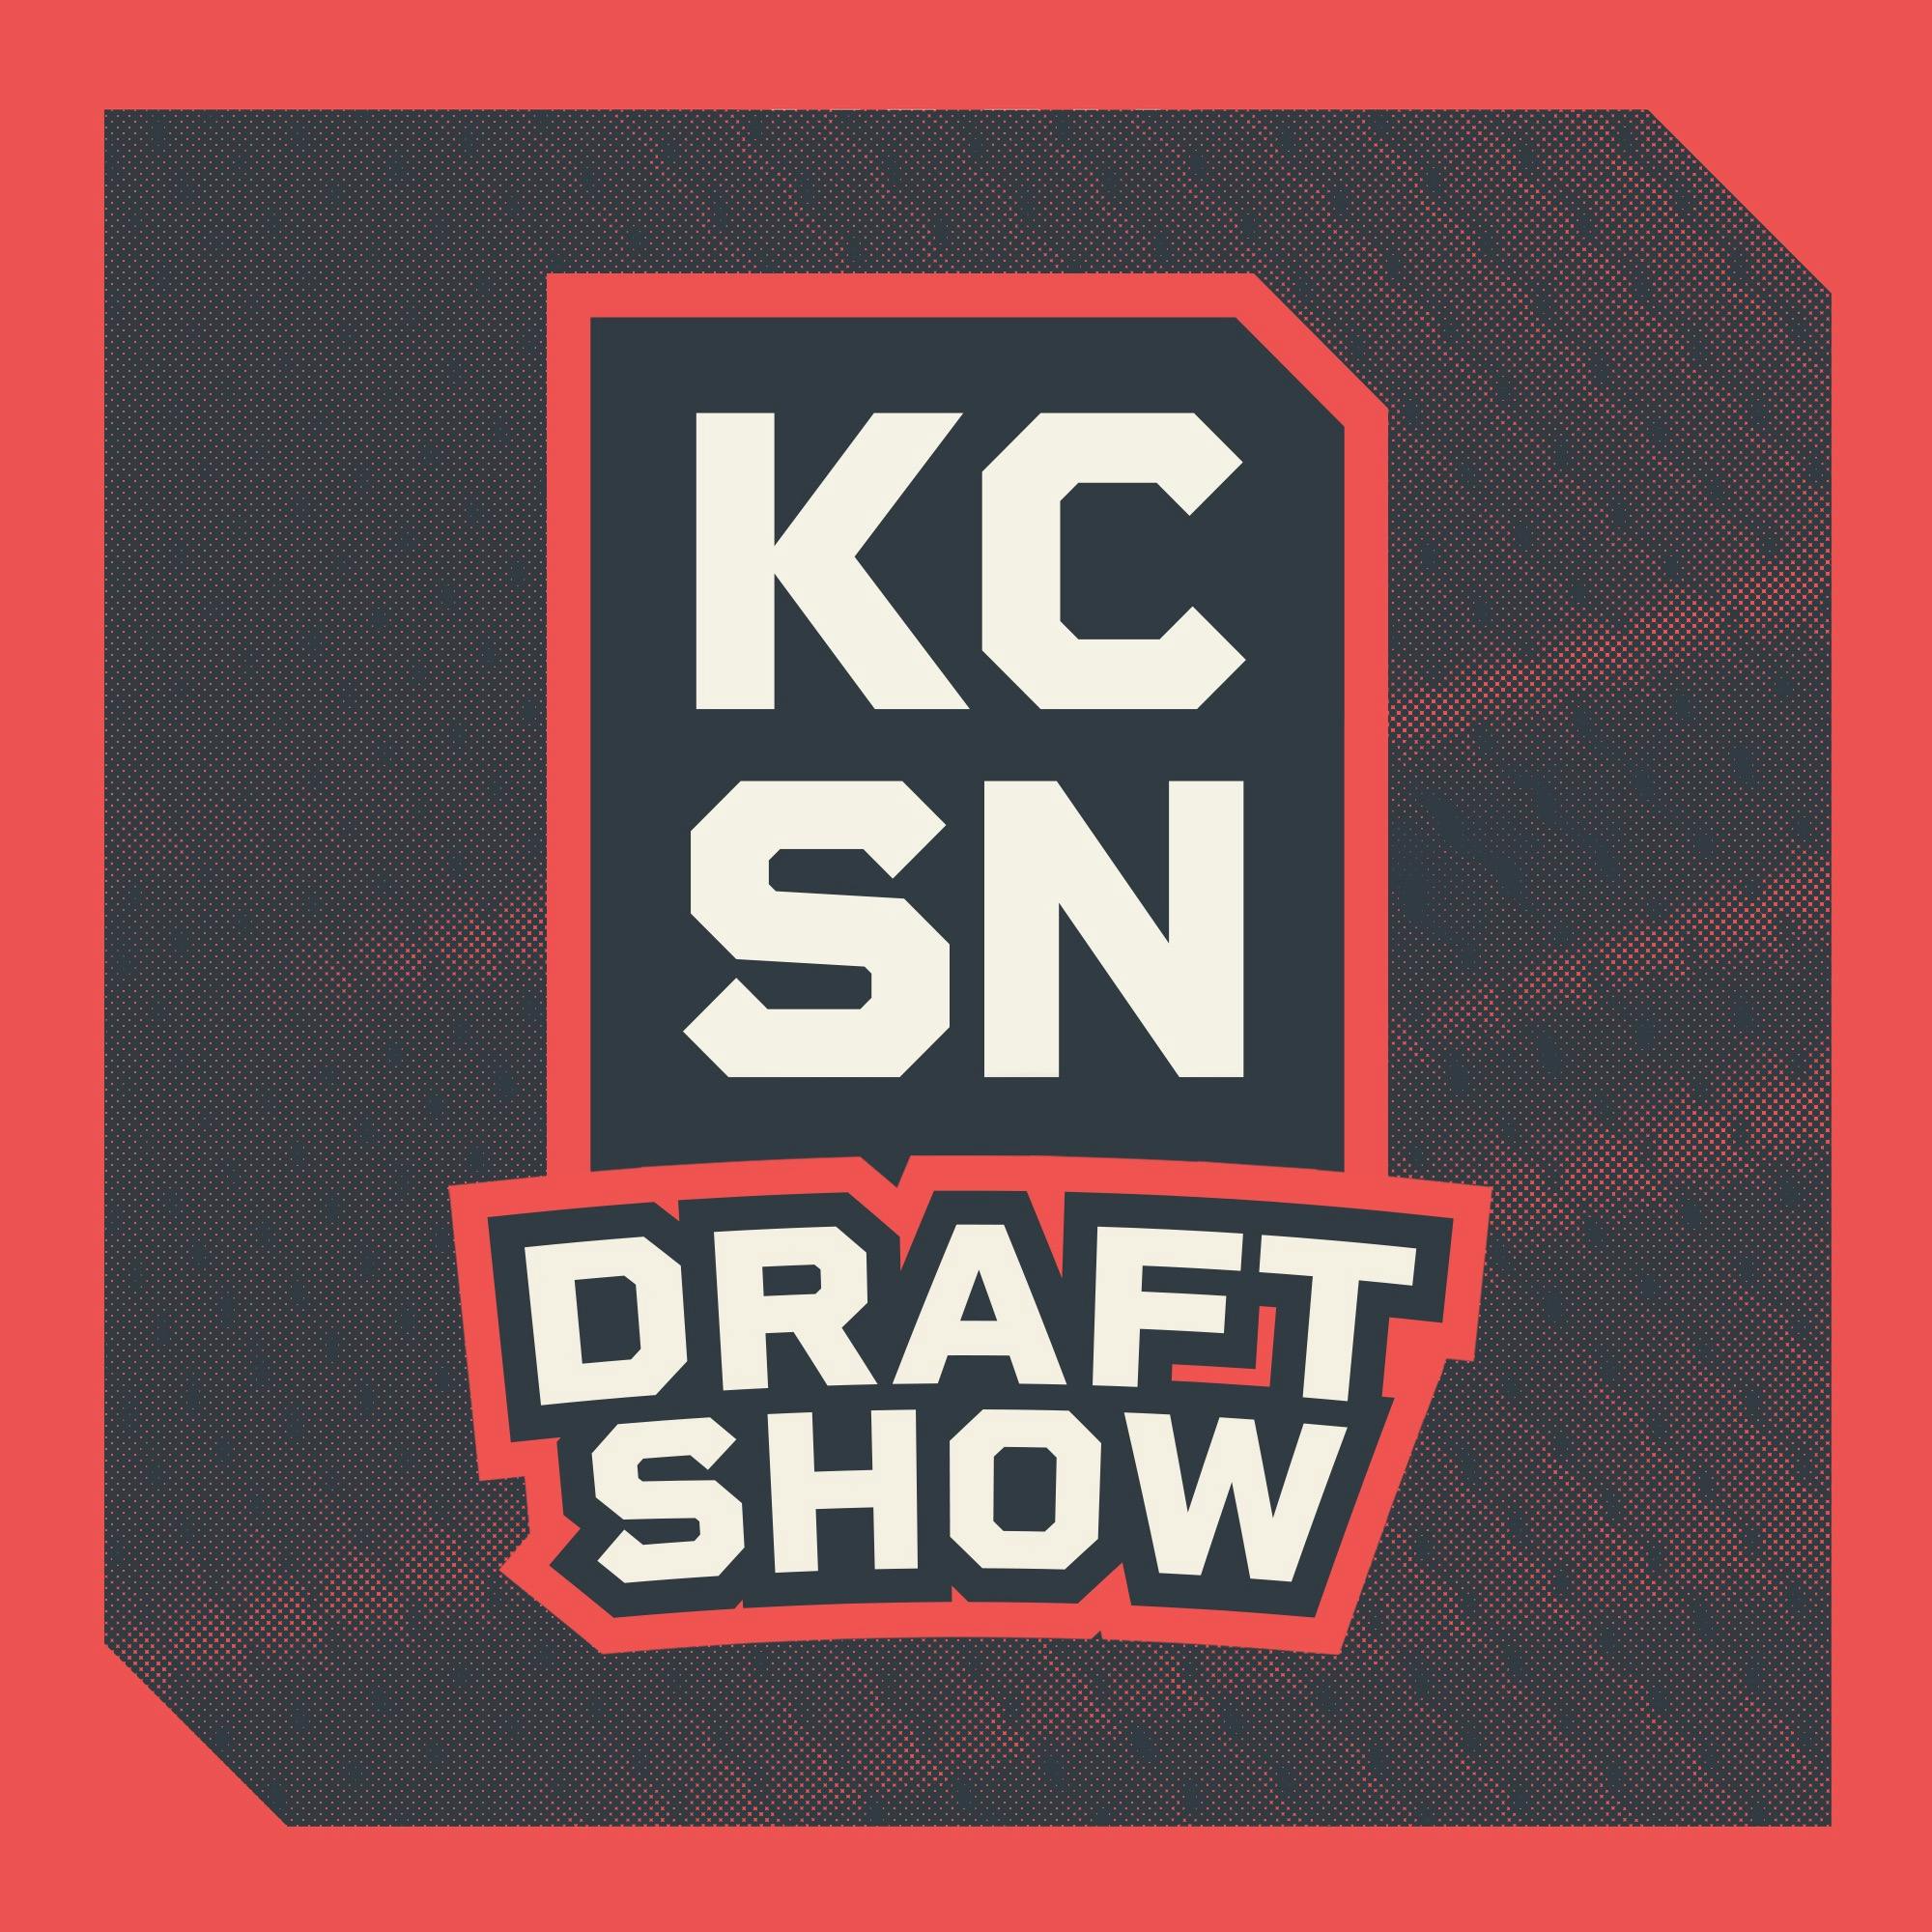 Breaking Down Chiefs’ Selection of Penn State OL Hunter Nourzad in 5th Round | KCSN Draft Show 4/27